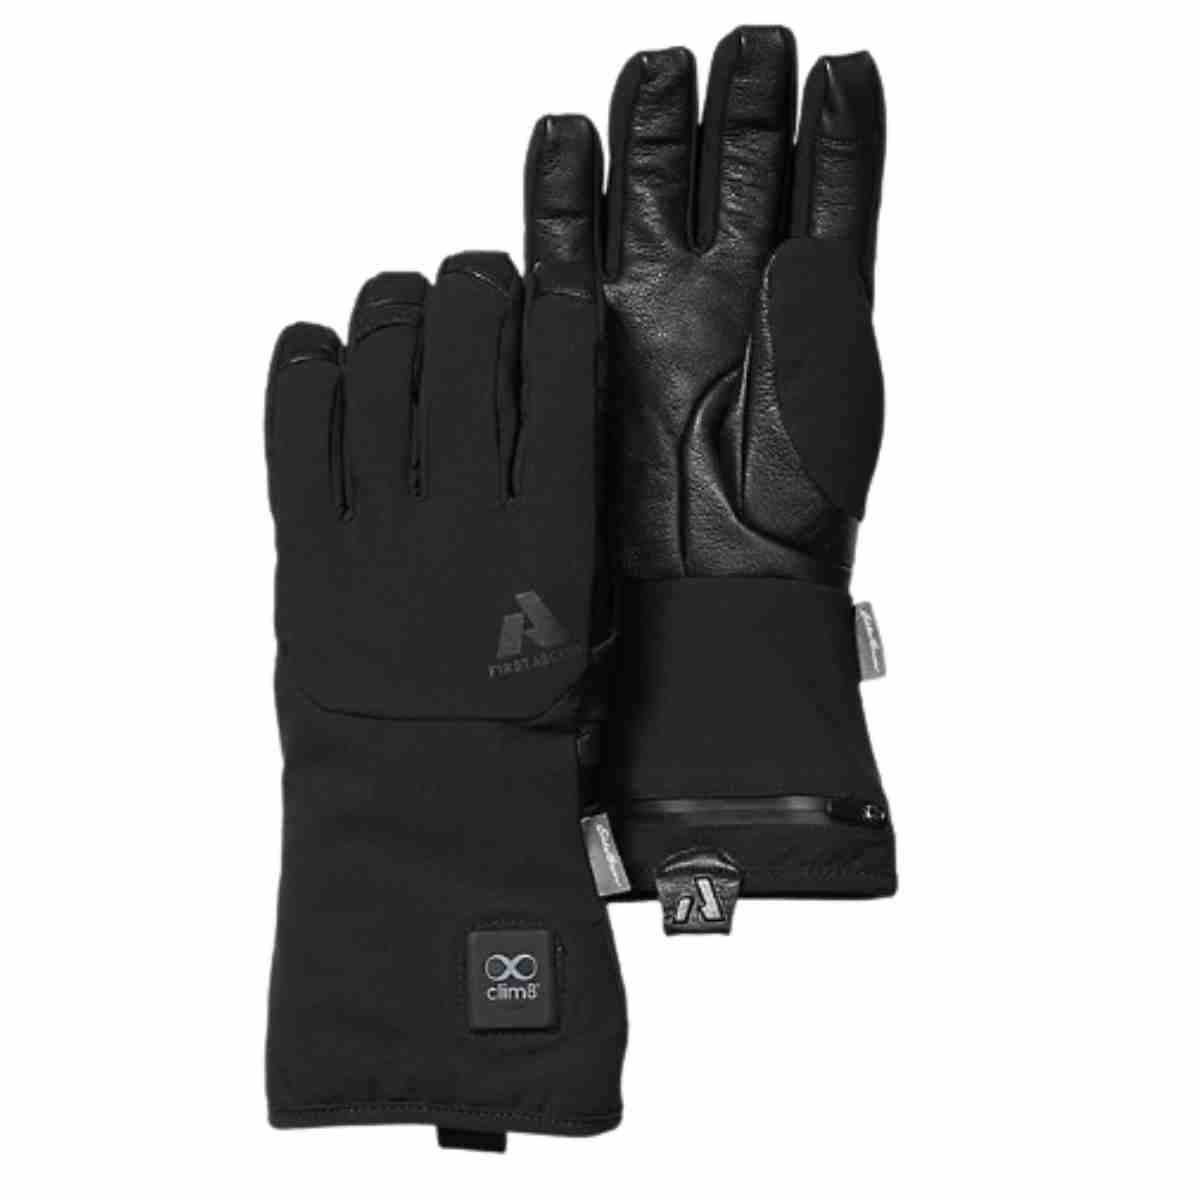 Reviewed) of 9 and 2024 Gloves (Tested Best Winter